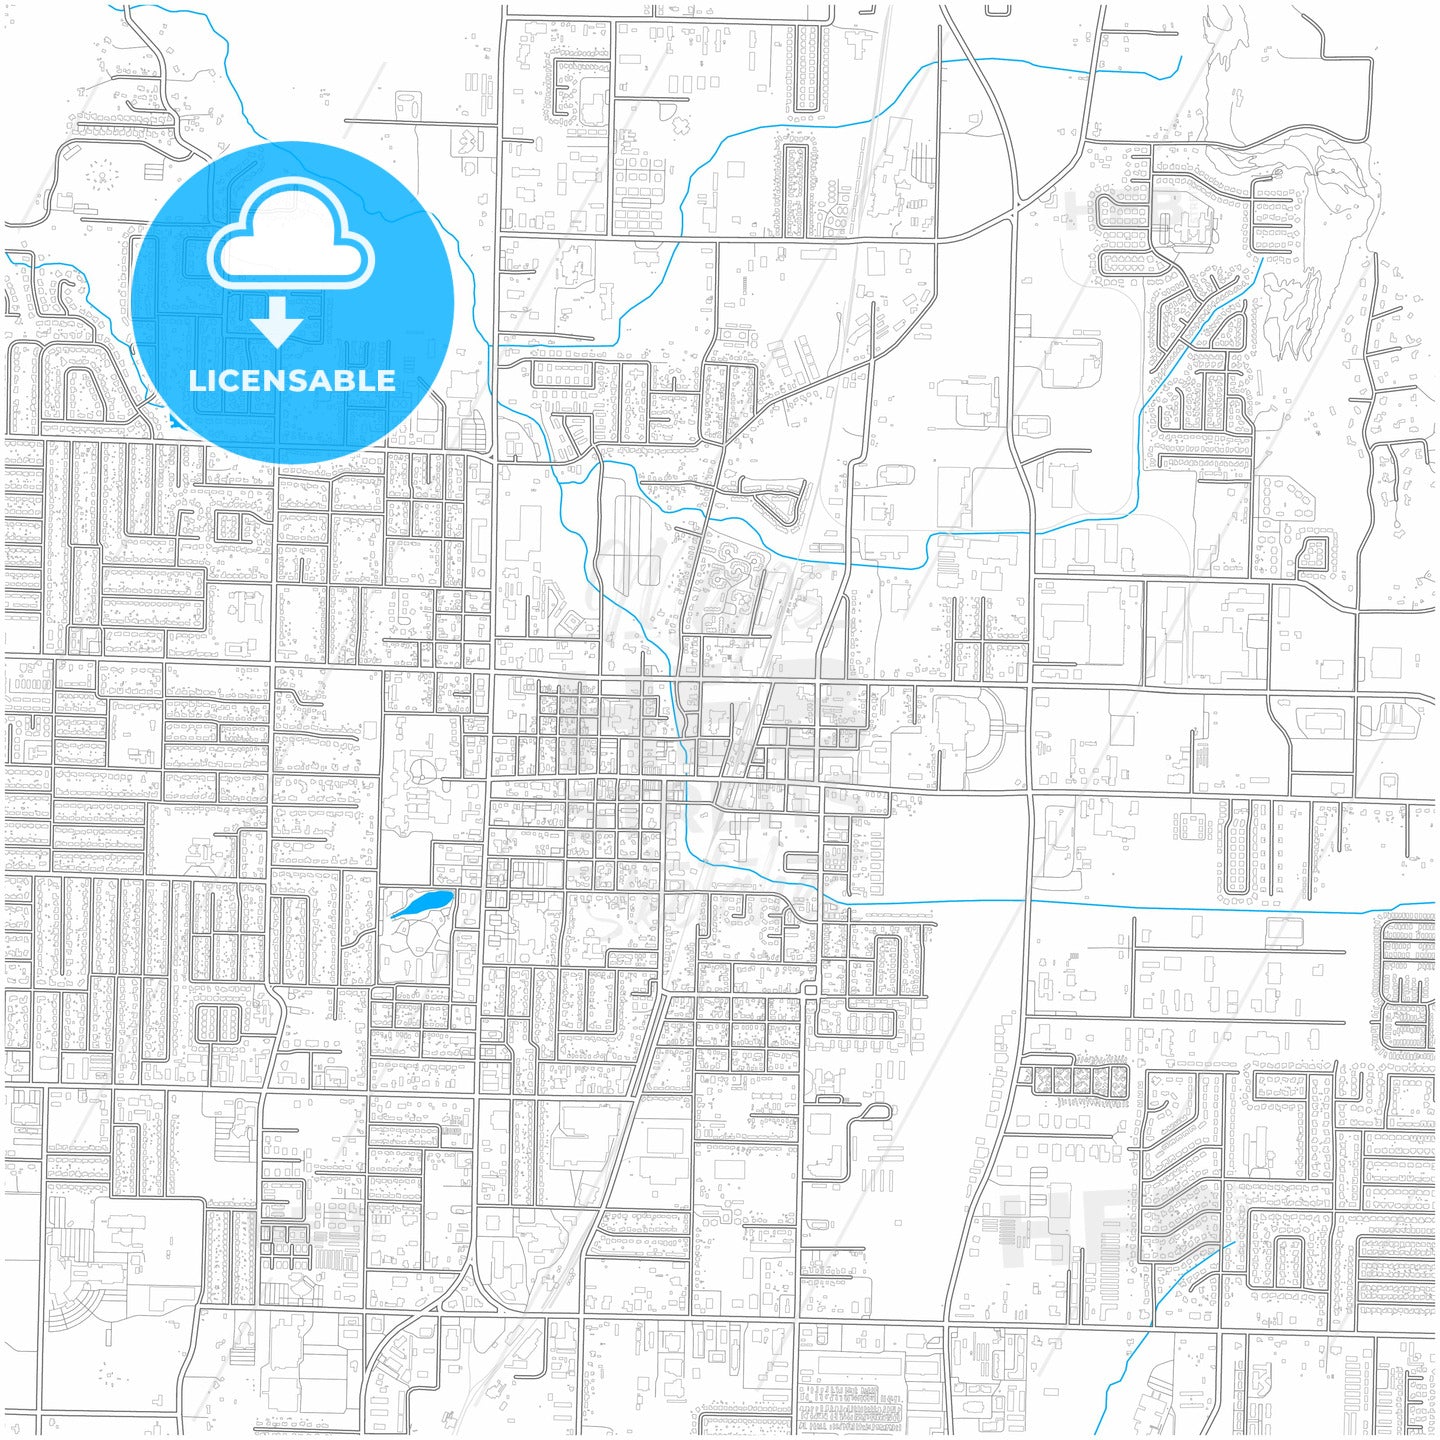 Springdale, Arkansas, United States, city map with high quality roads.